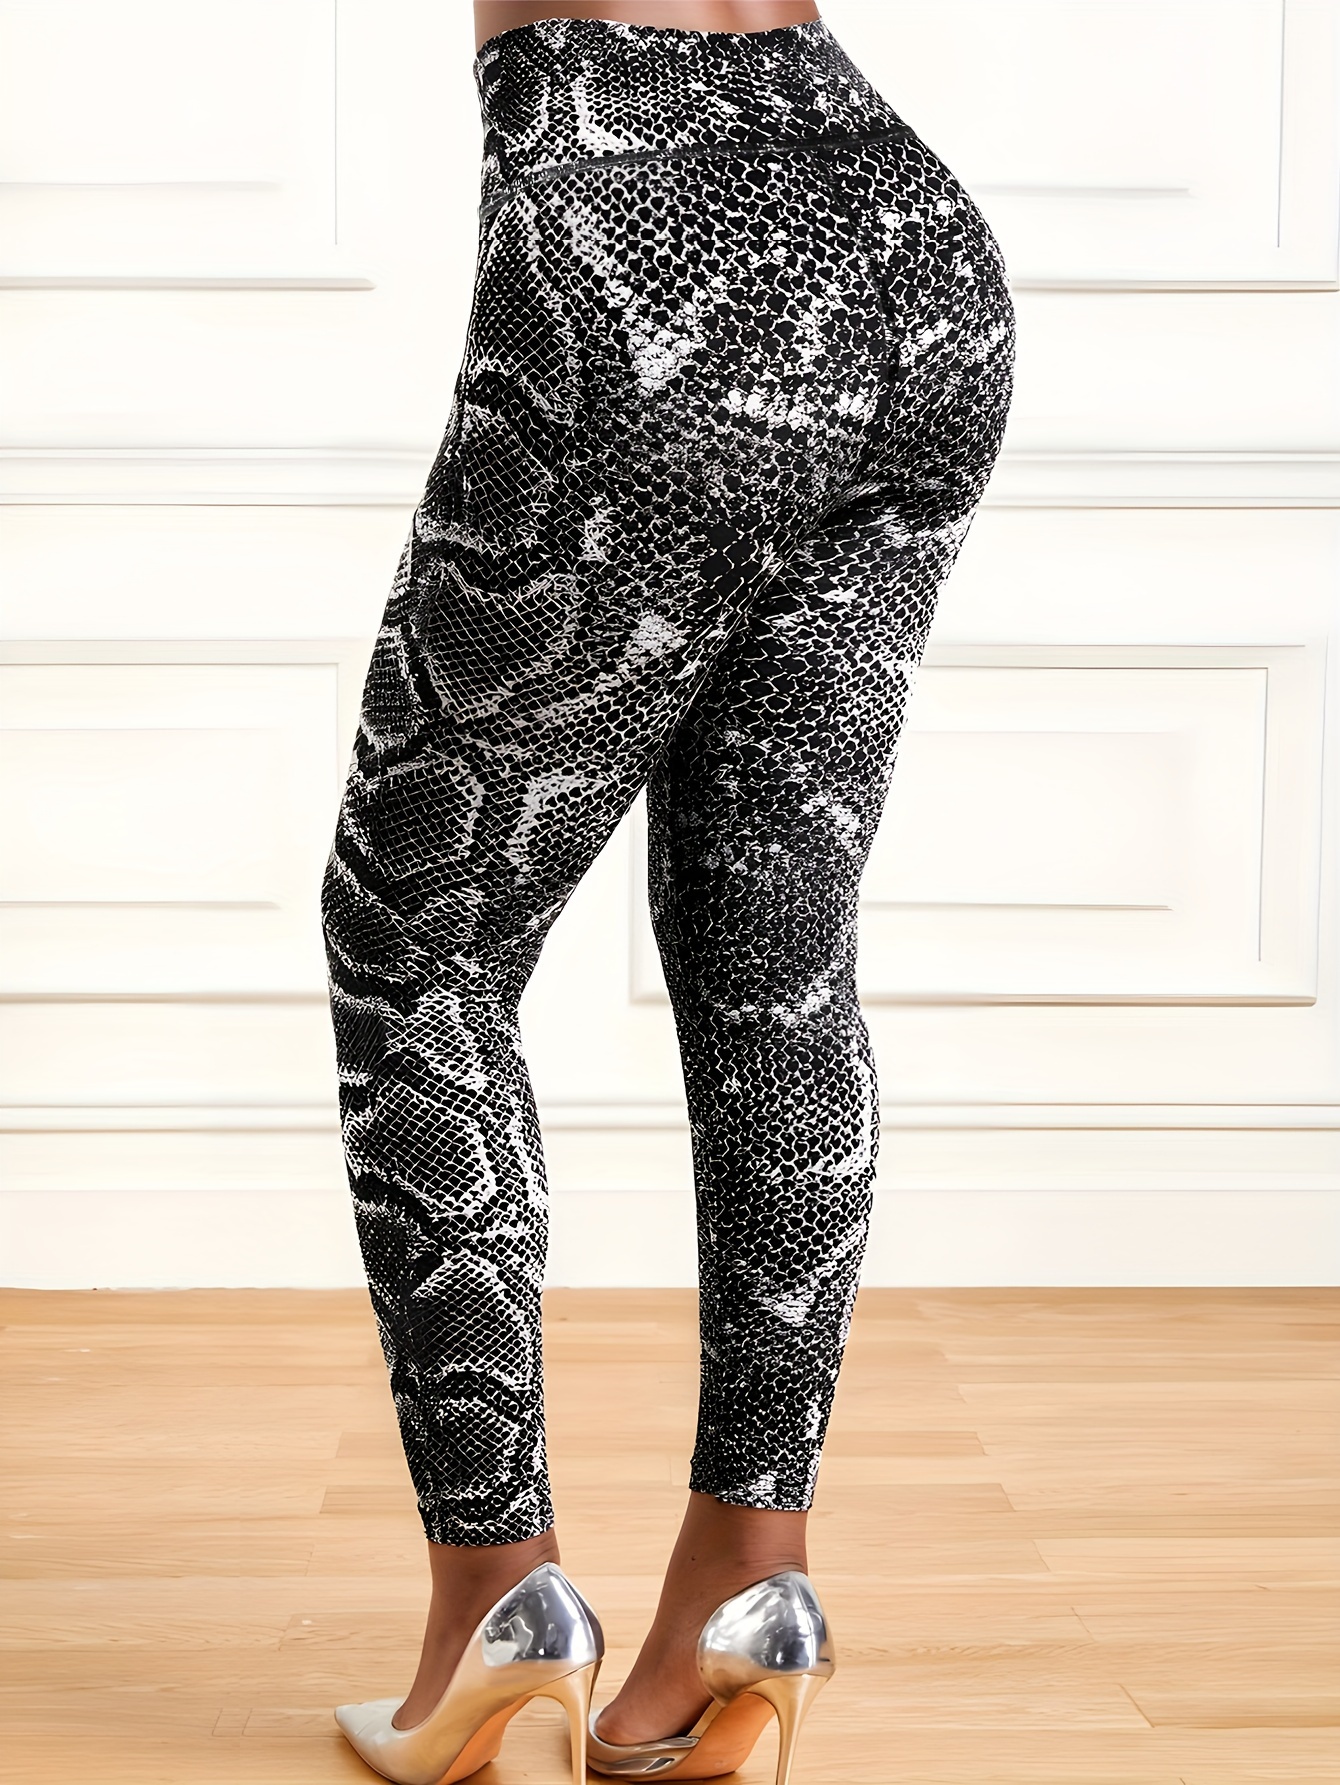 Yoga Tights Workout Pants Fitness Leggings Women Snake Print Push Up Sport  Leggin Ladies High Waist Casual Gym Wear Large Size From Ivogue888, $5.25